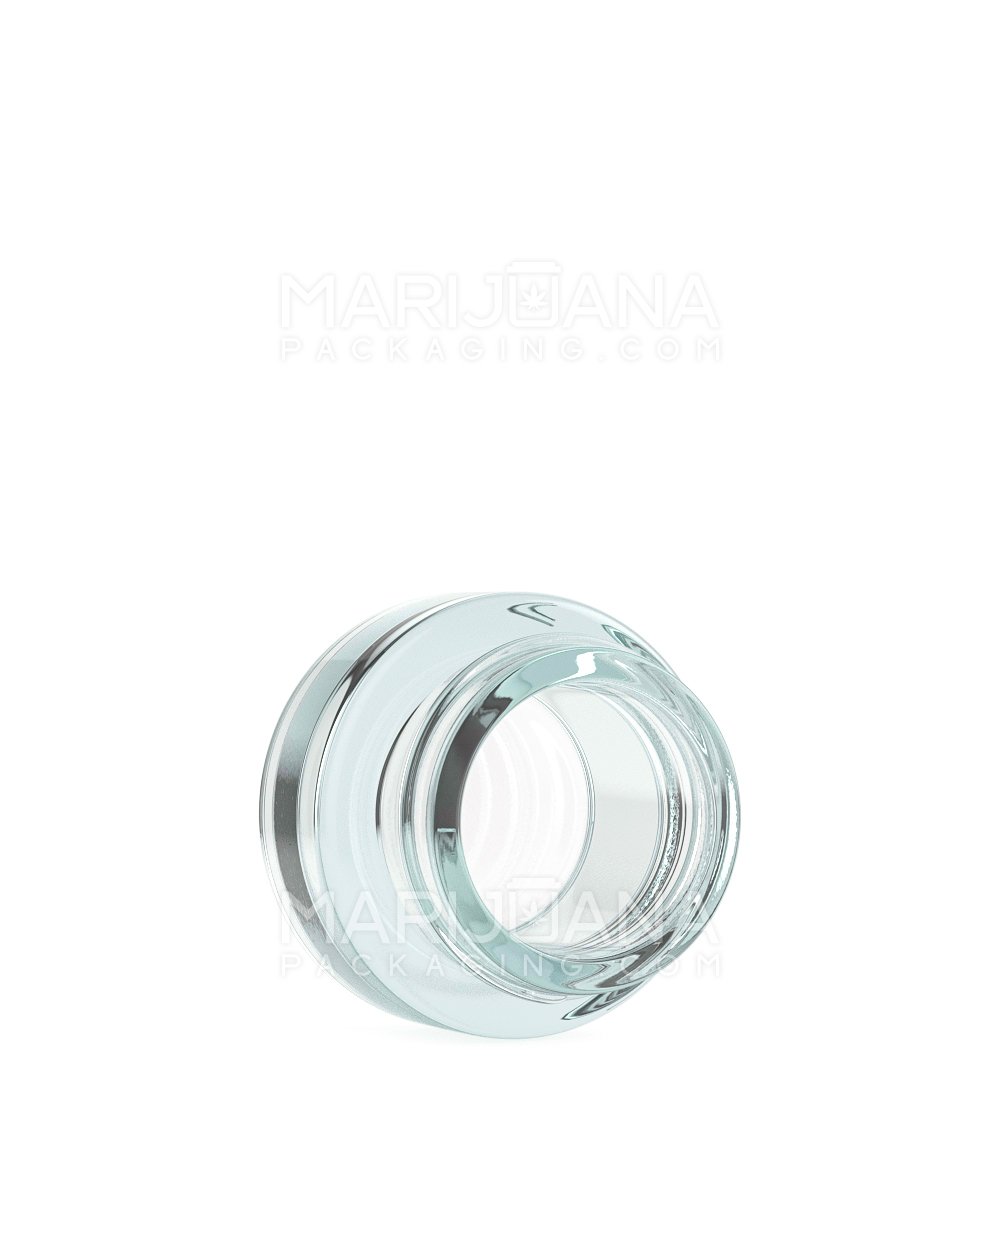 Clear Glass Concentrate Containers | 29mm - 5mL - 504 Count - 3